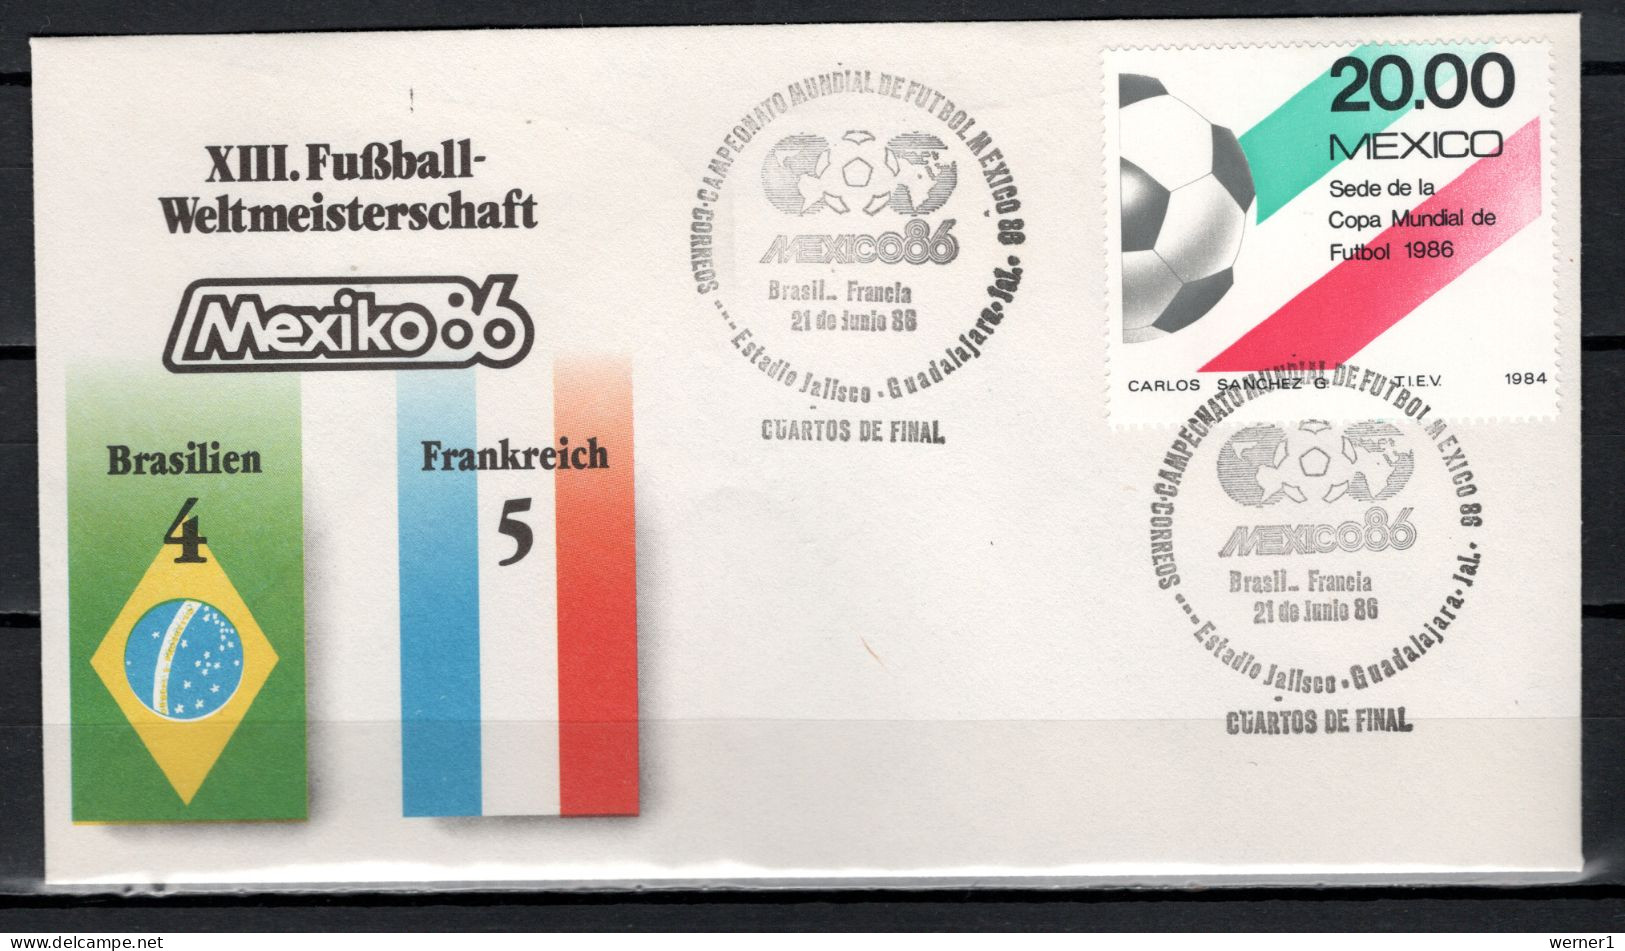 Mexico 1986 Football Soccer World Cup Commemorative Cover Match Brazil - France 4 : 5 - 1986 – Mexique